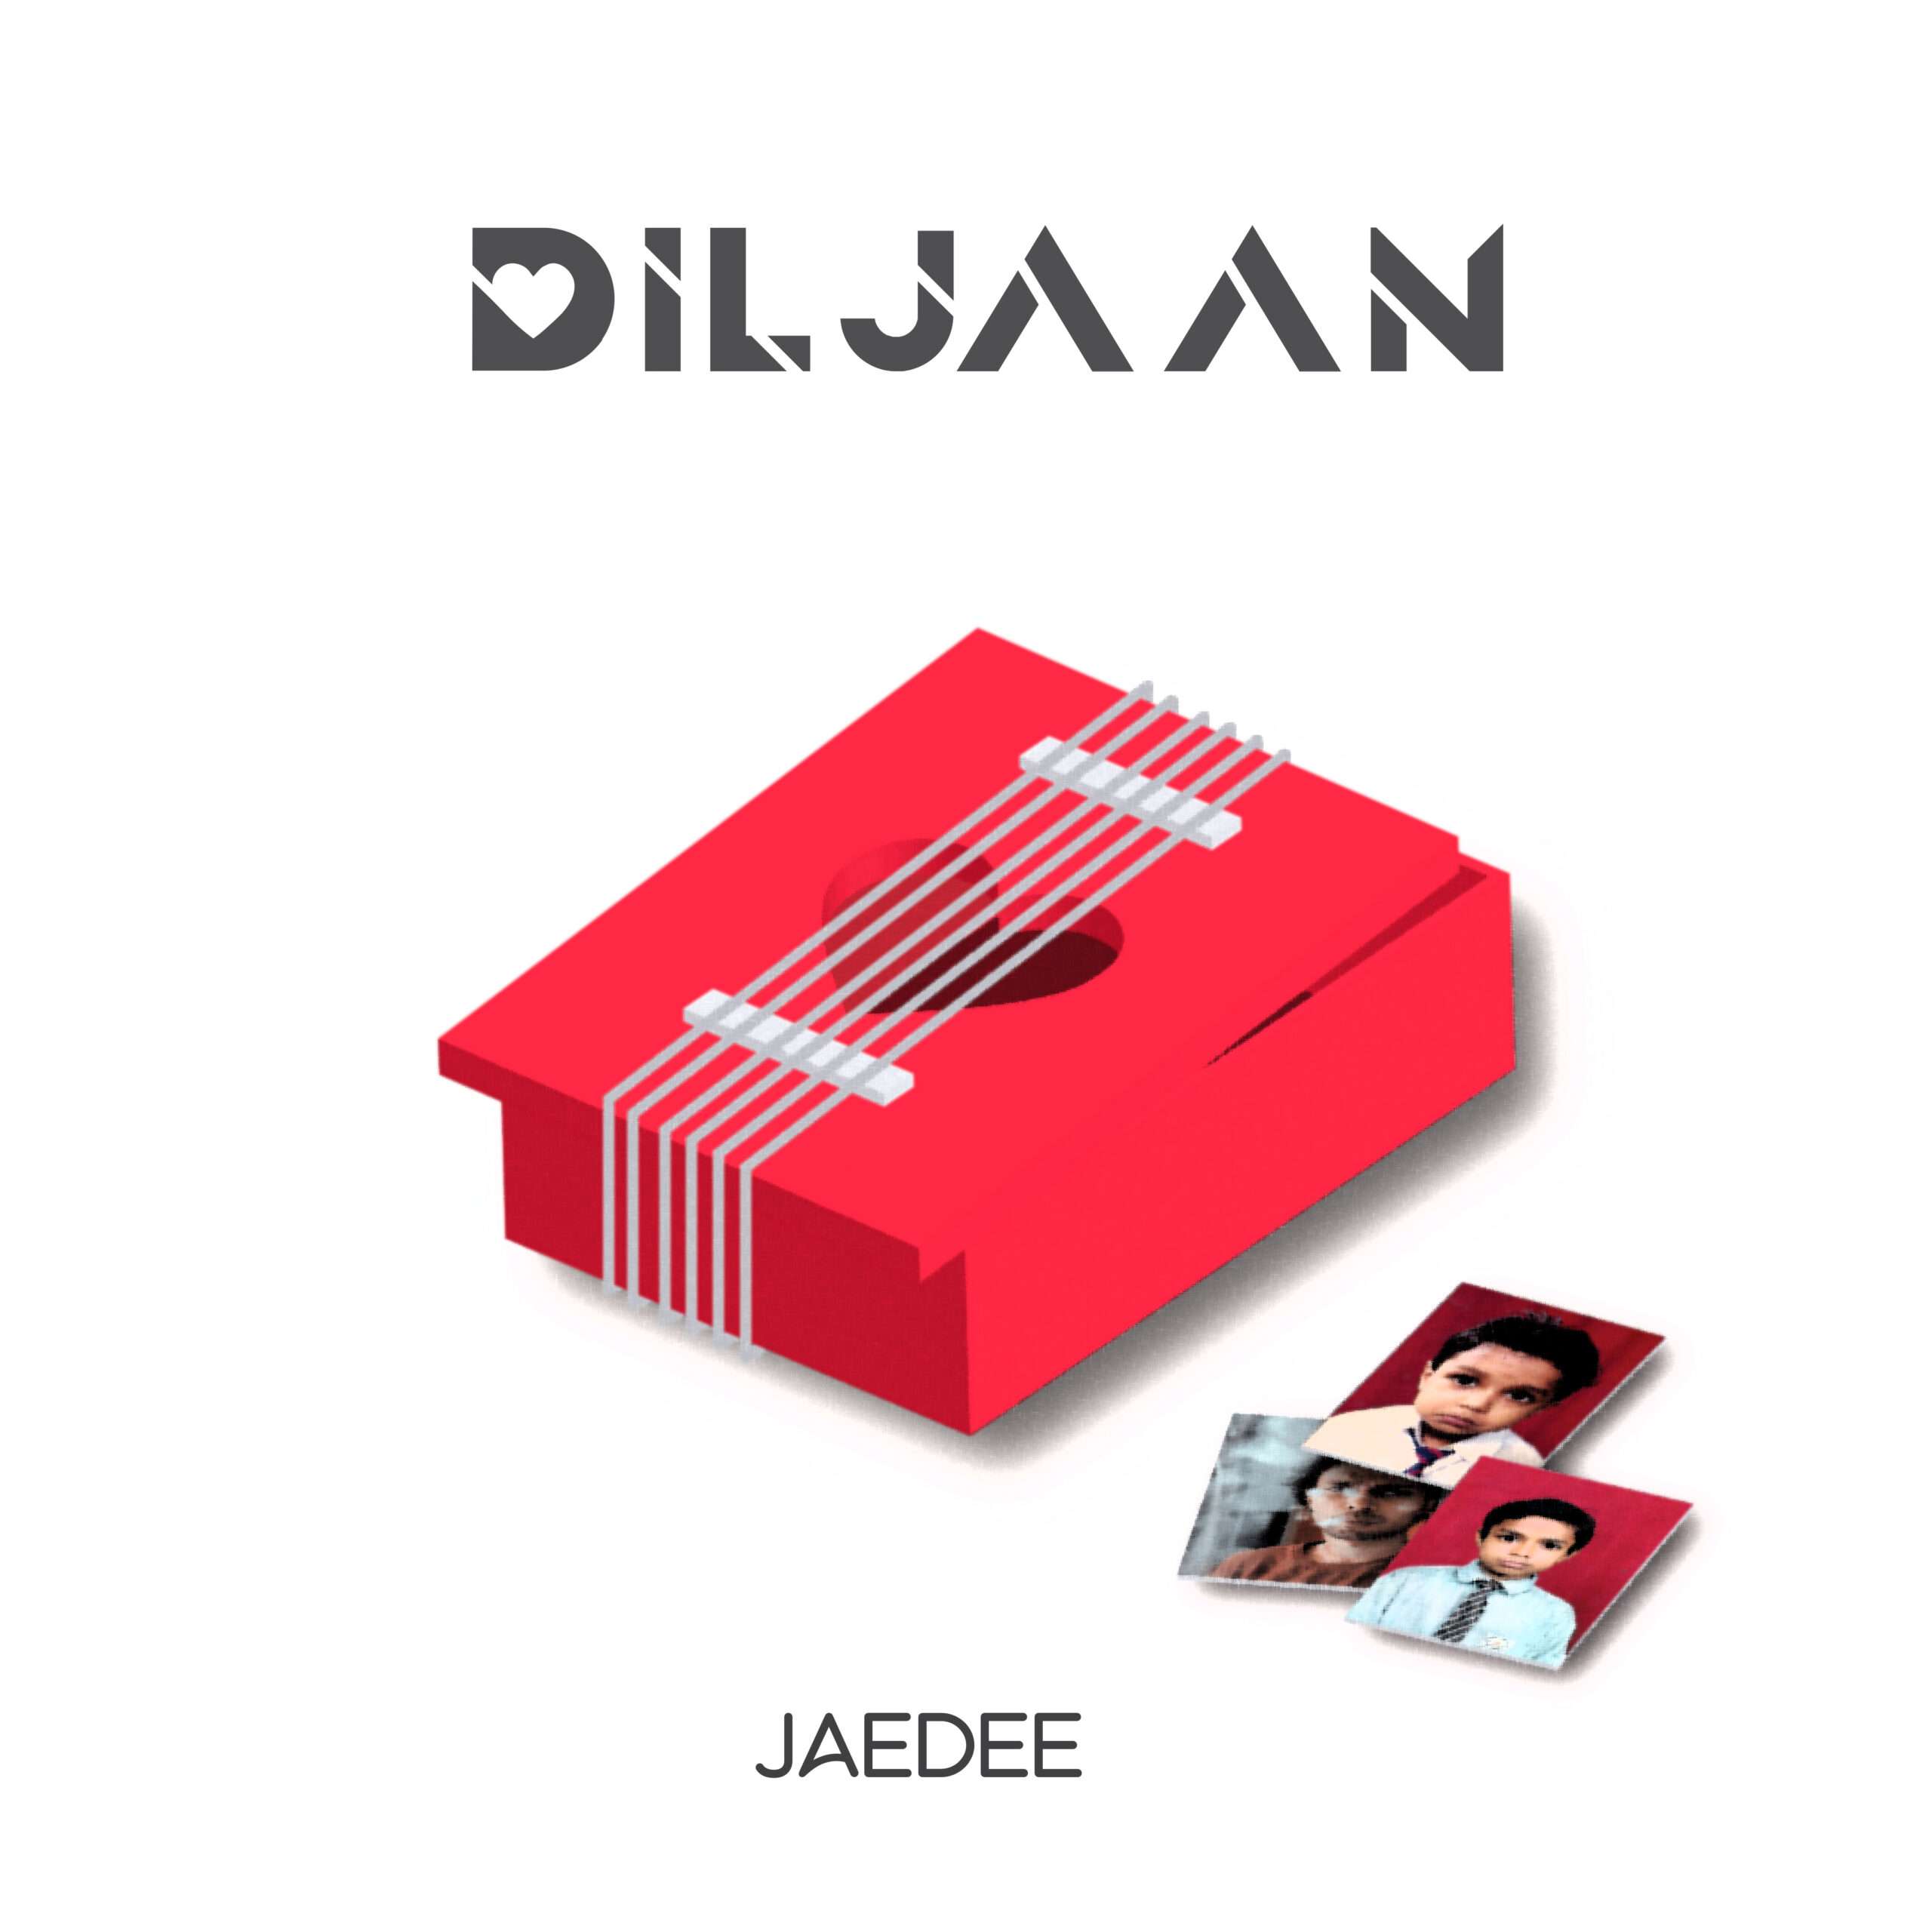 JaeDee’s latest single “DilJaan” is the pain of your first heartbreak beautifully expressed by stepping into the lover’s shoes.